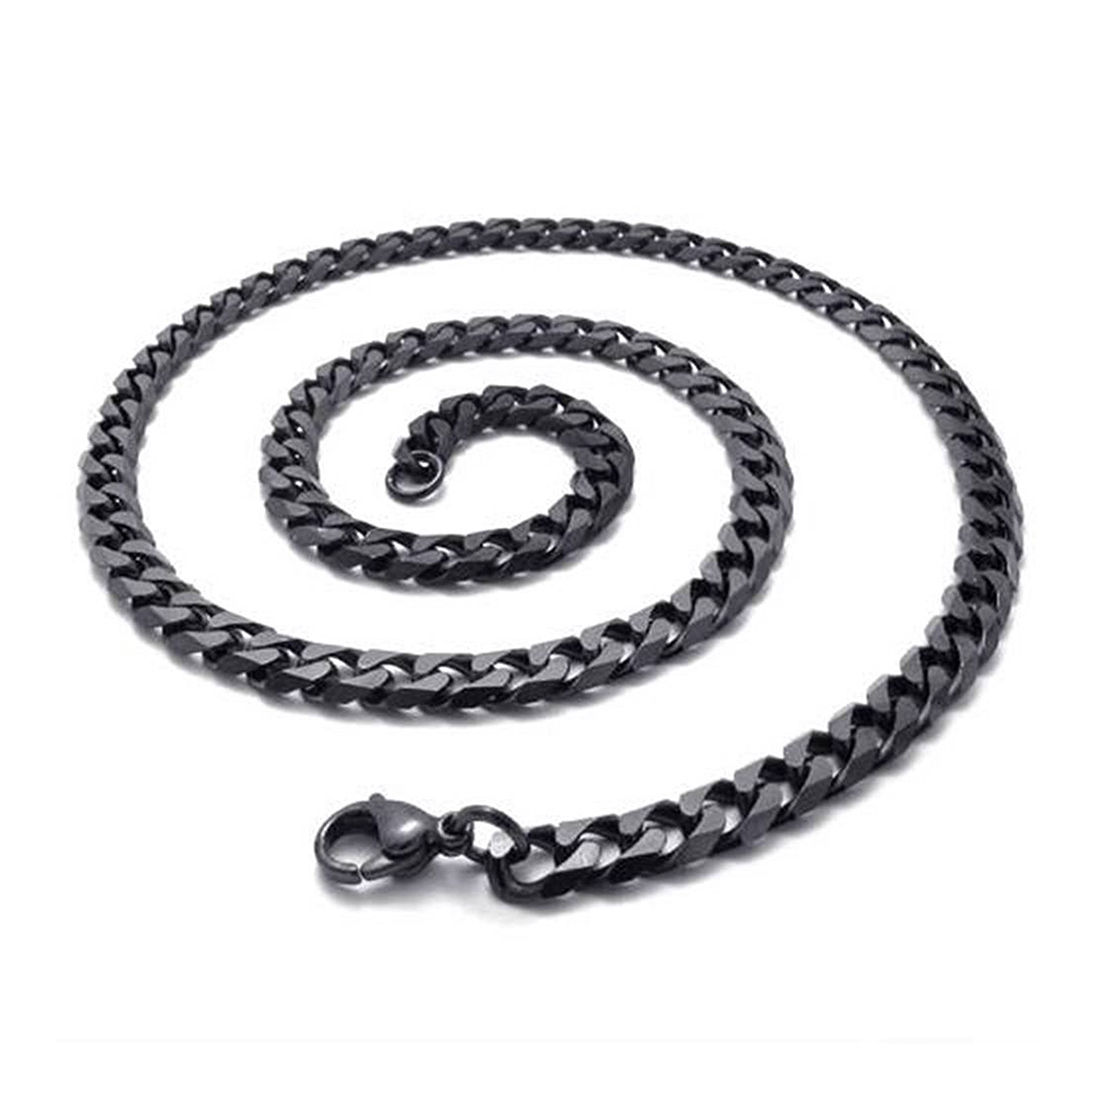 Silver Plated Stainless Steel Chain Price in India - Buy Silver Plated Stainless  Steel Chain online at Shopsy.in